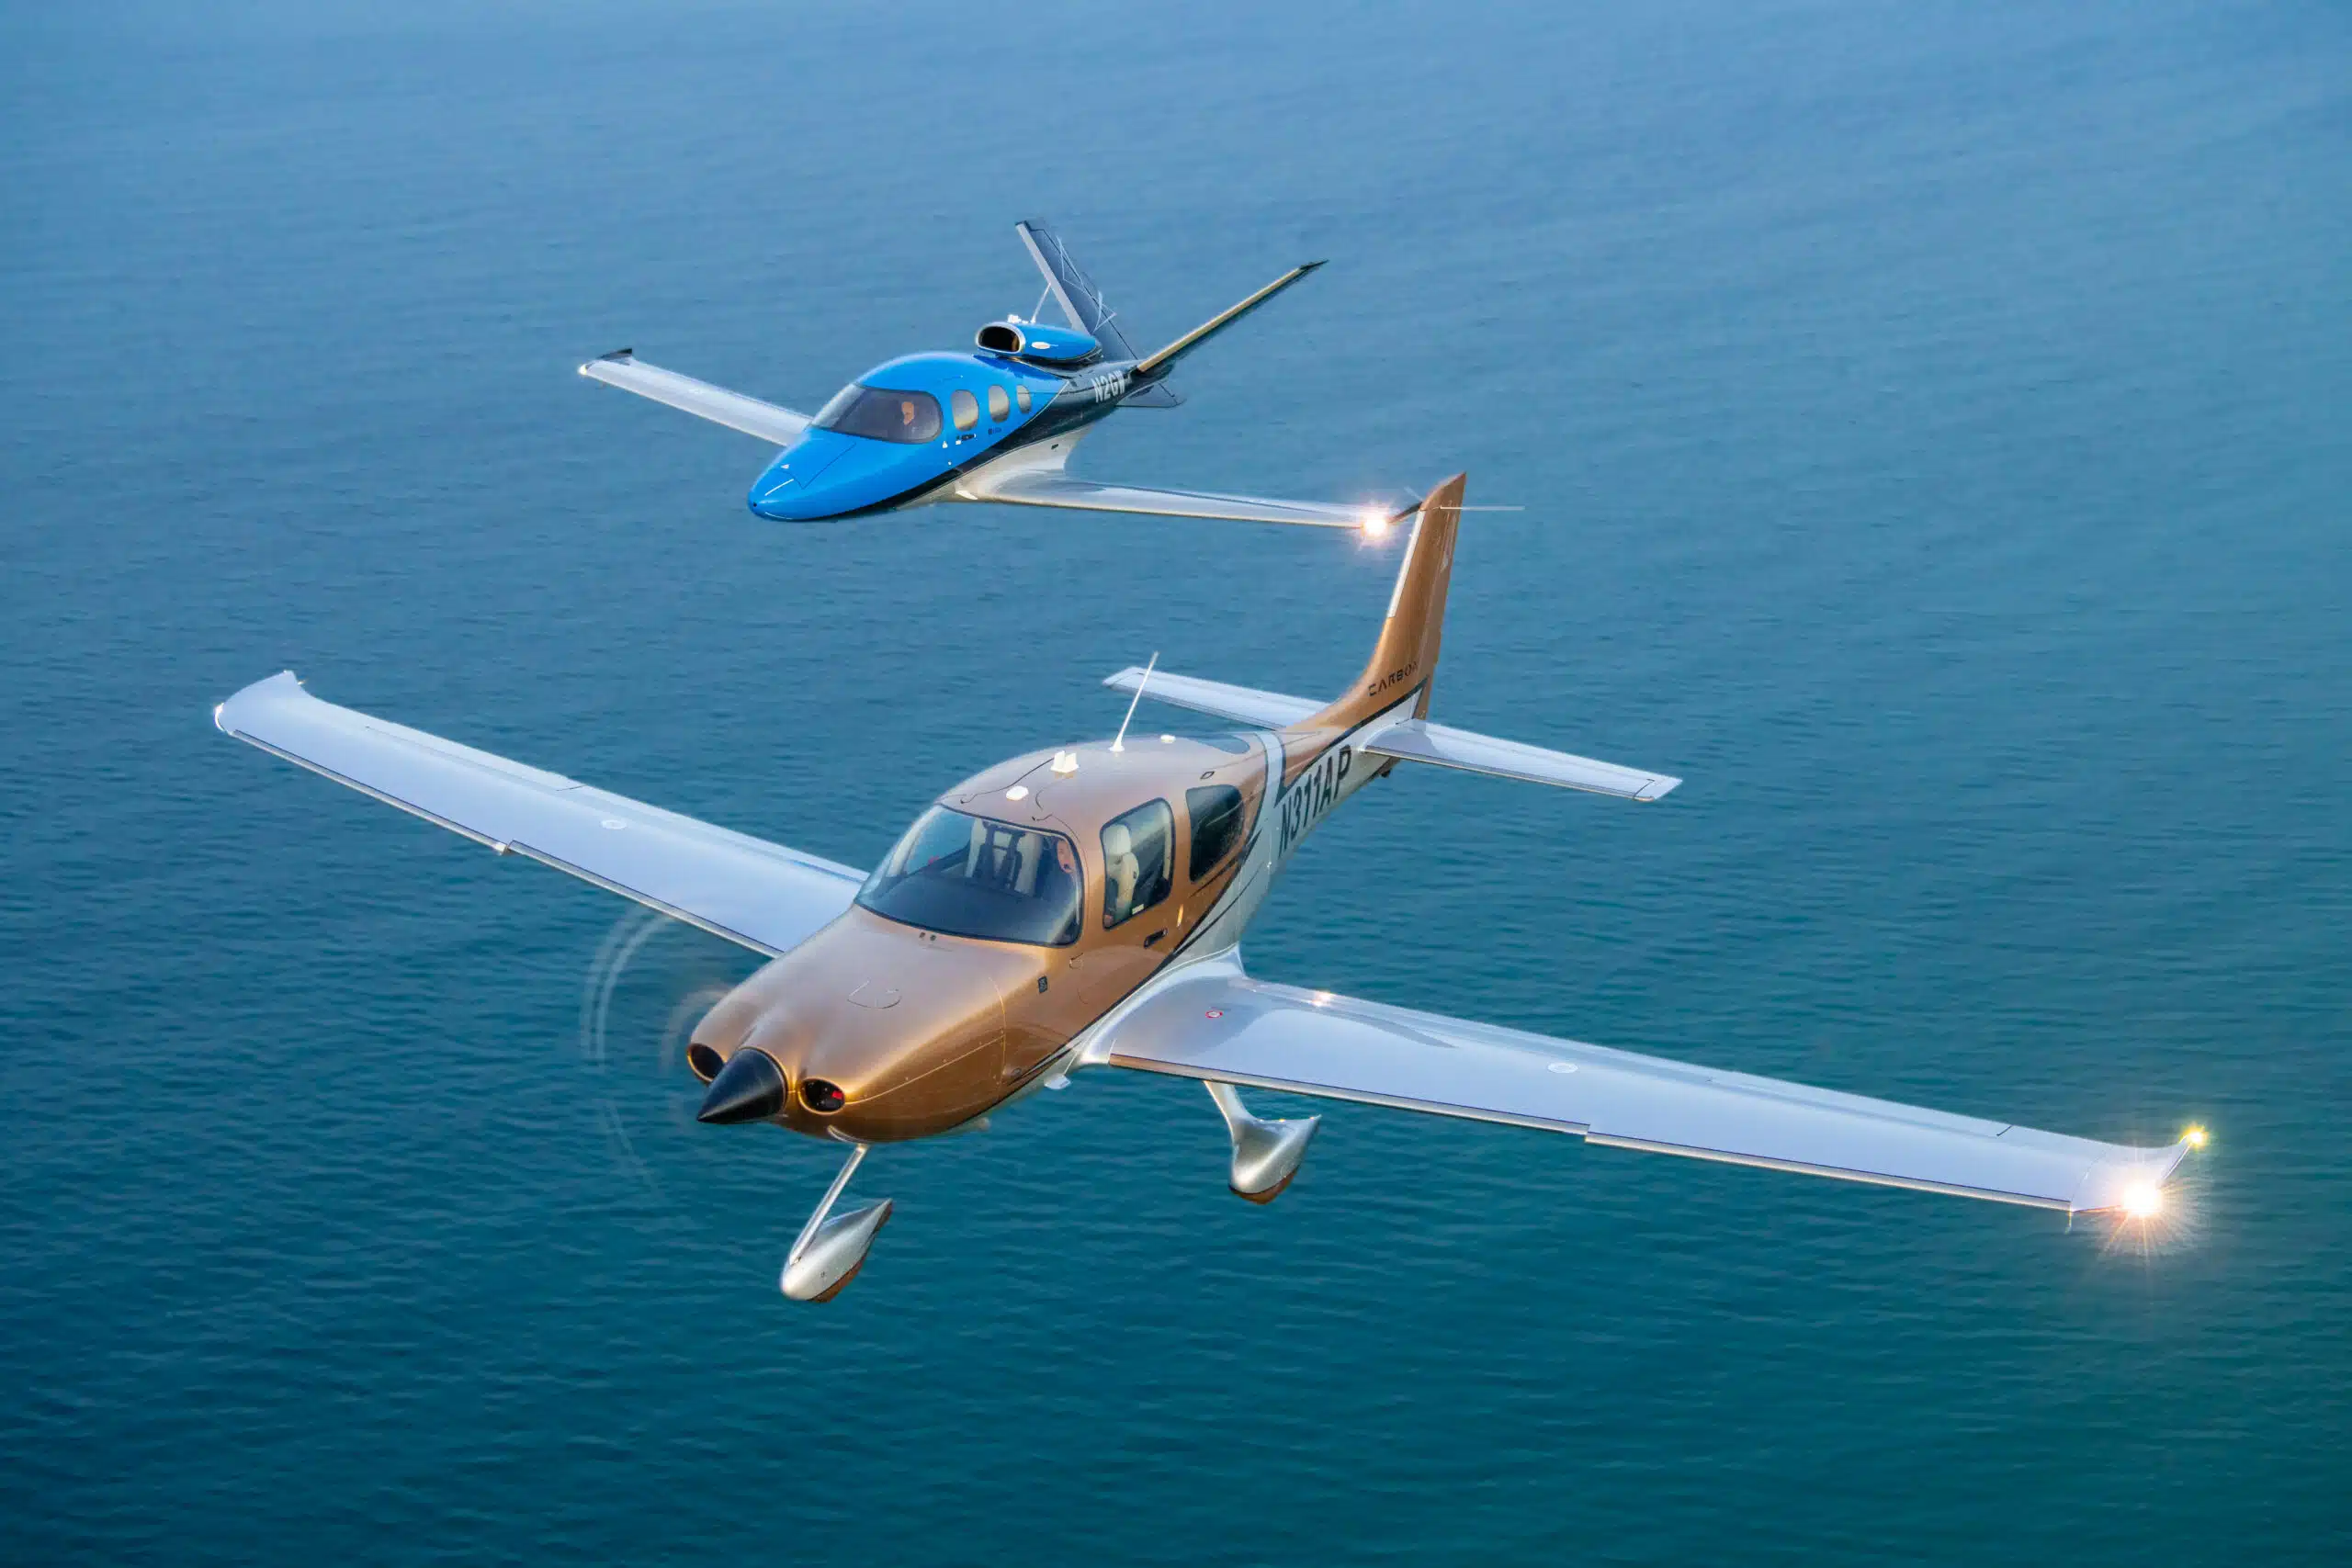 Cirrus Aircraft Delivers Record Year and Invests in Innovation